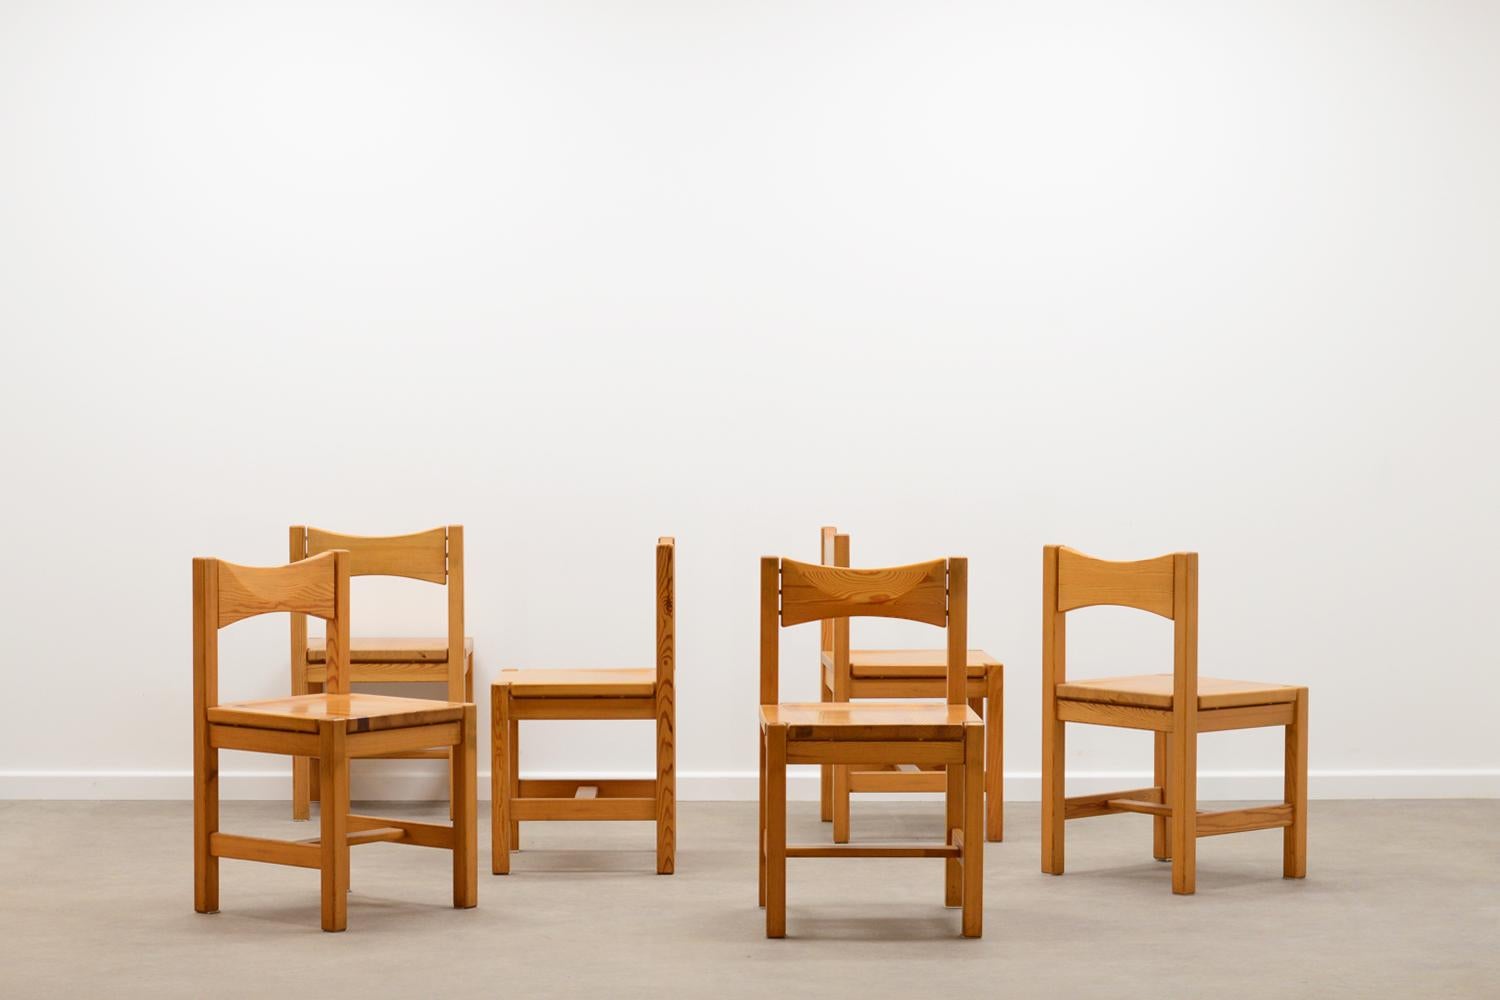 Hongisto dining set by Ilamri Tapiovaara for Laukaan Puu, Finland 60s. 6 chairs and a dining table made of solid pine wood. Minimal wear of age and use on the table top. Set is in very good vintage condition. 

Measurements table:
– Height: 72